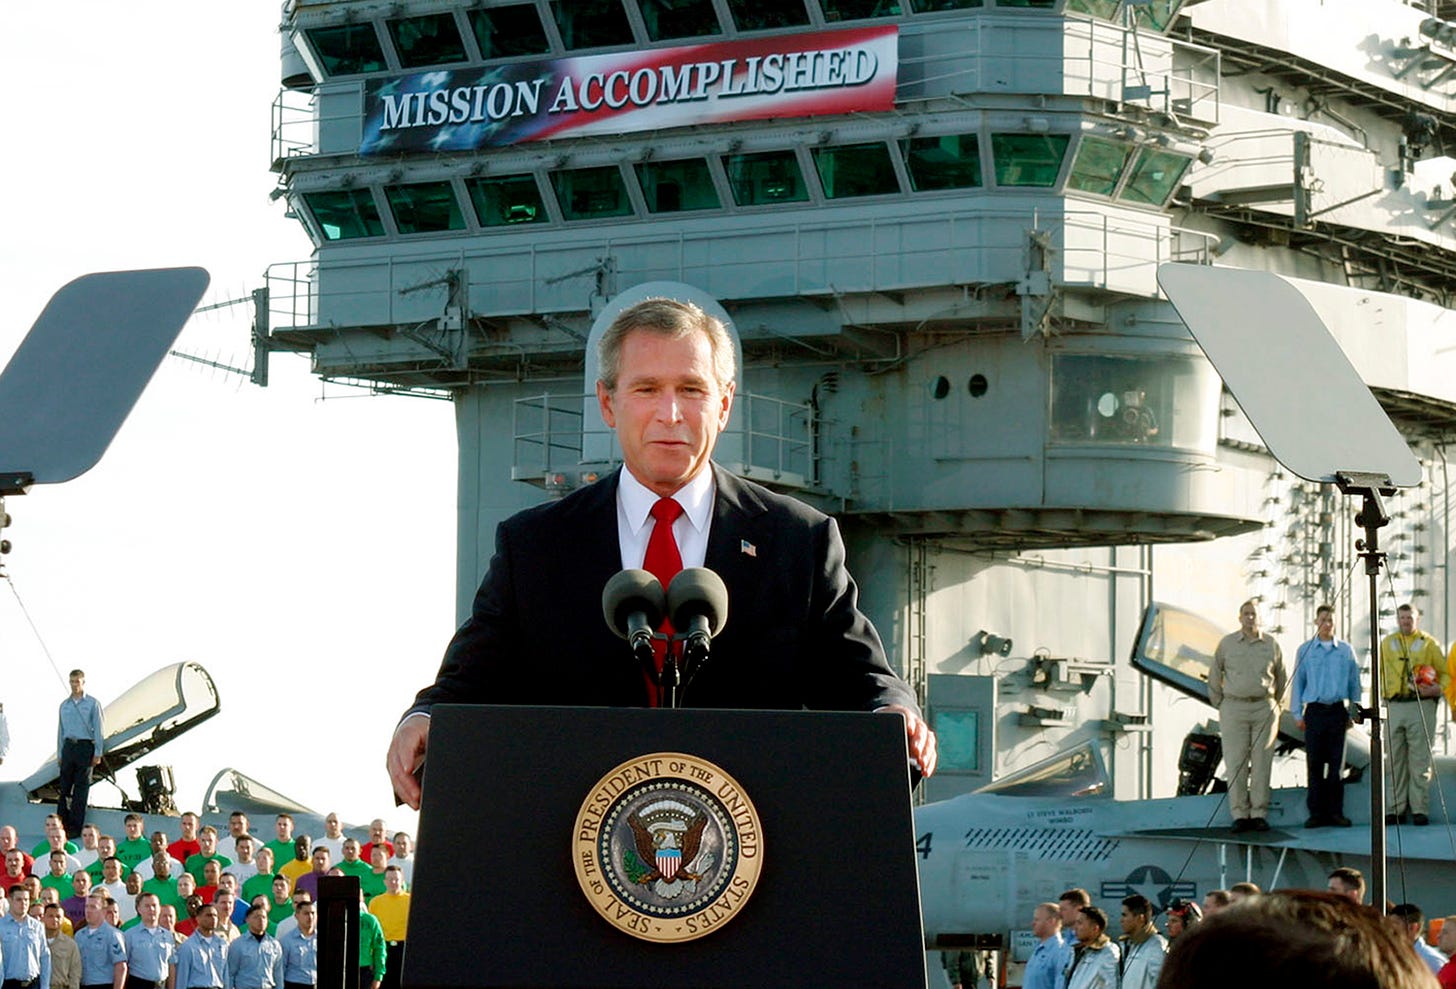 Bush was haunted by his own 'Mission Accomplished' - The Boston Globe